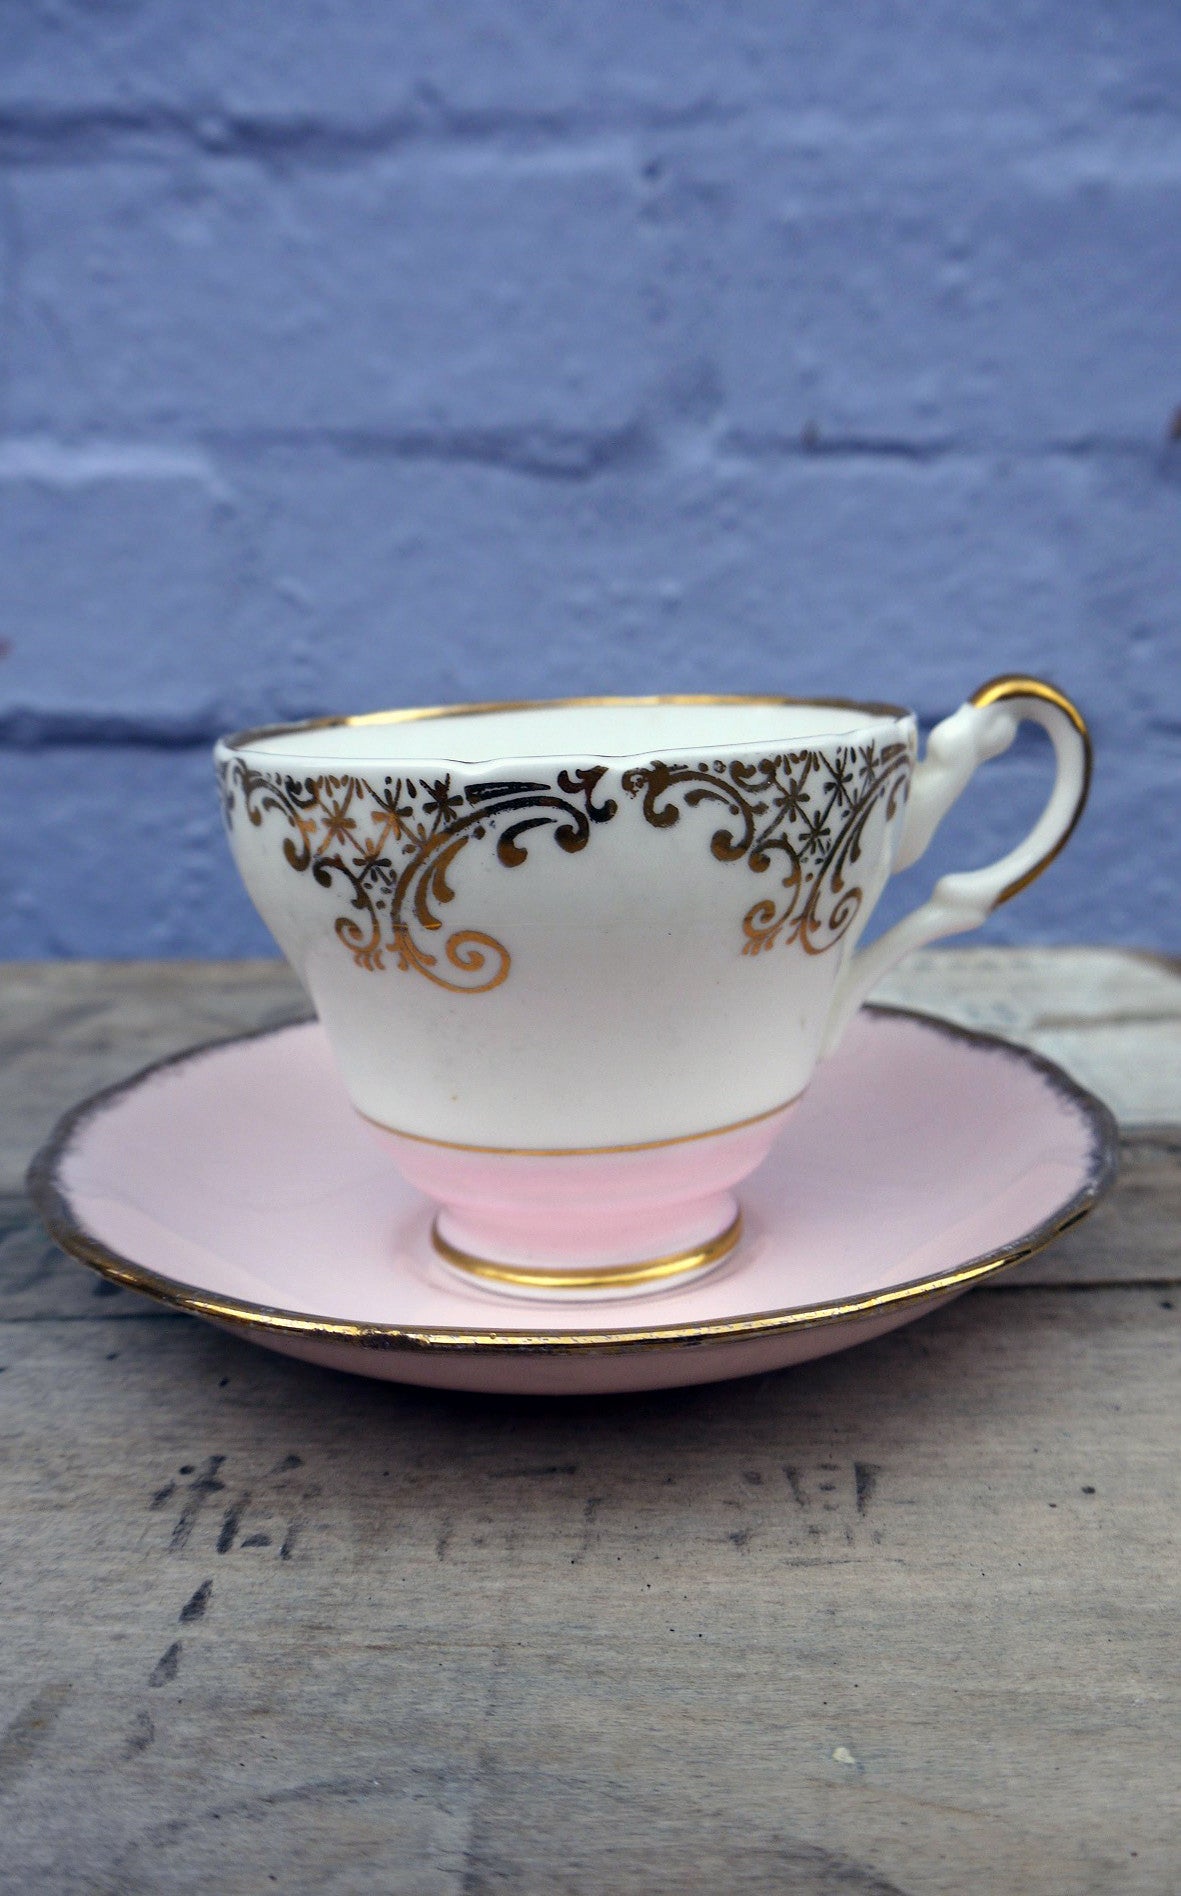 Vintage pink gold and white teacup